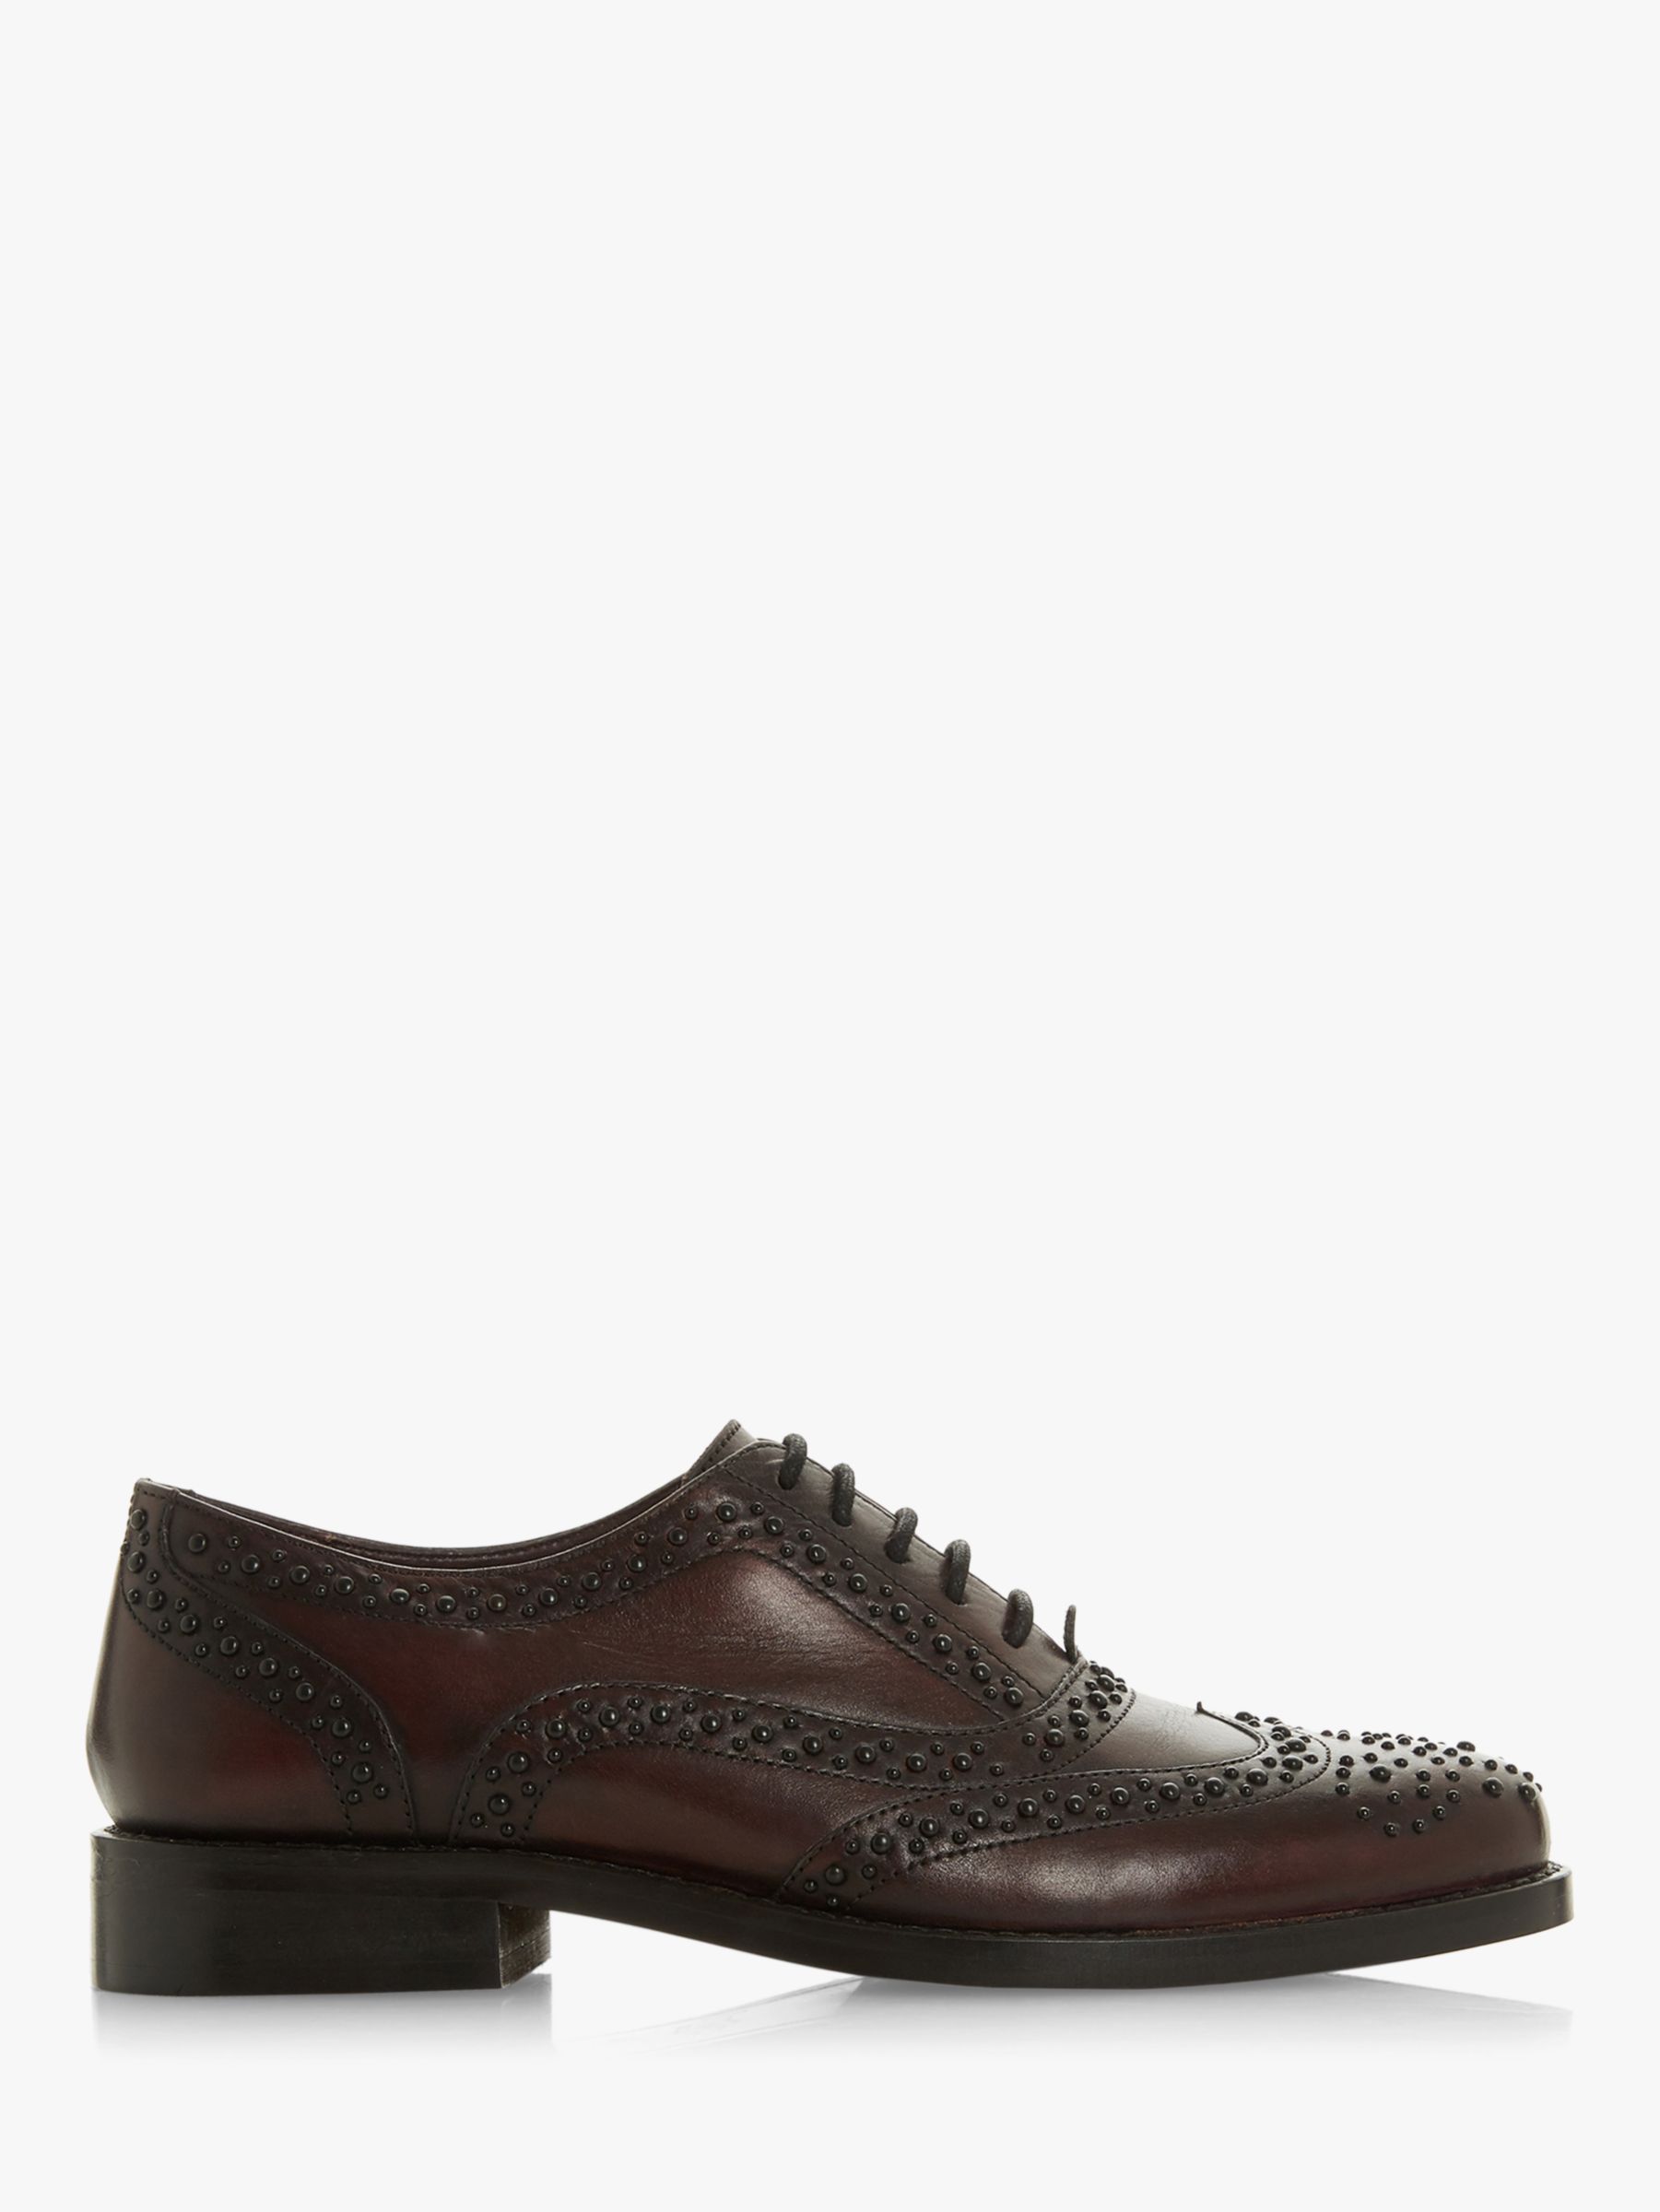 Bertie Forrce Leather Lace Up Brogues